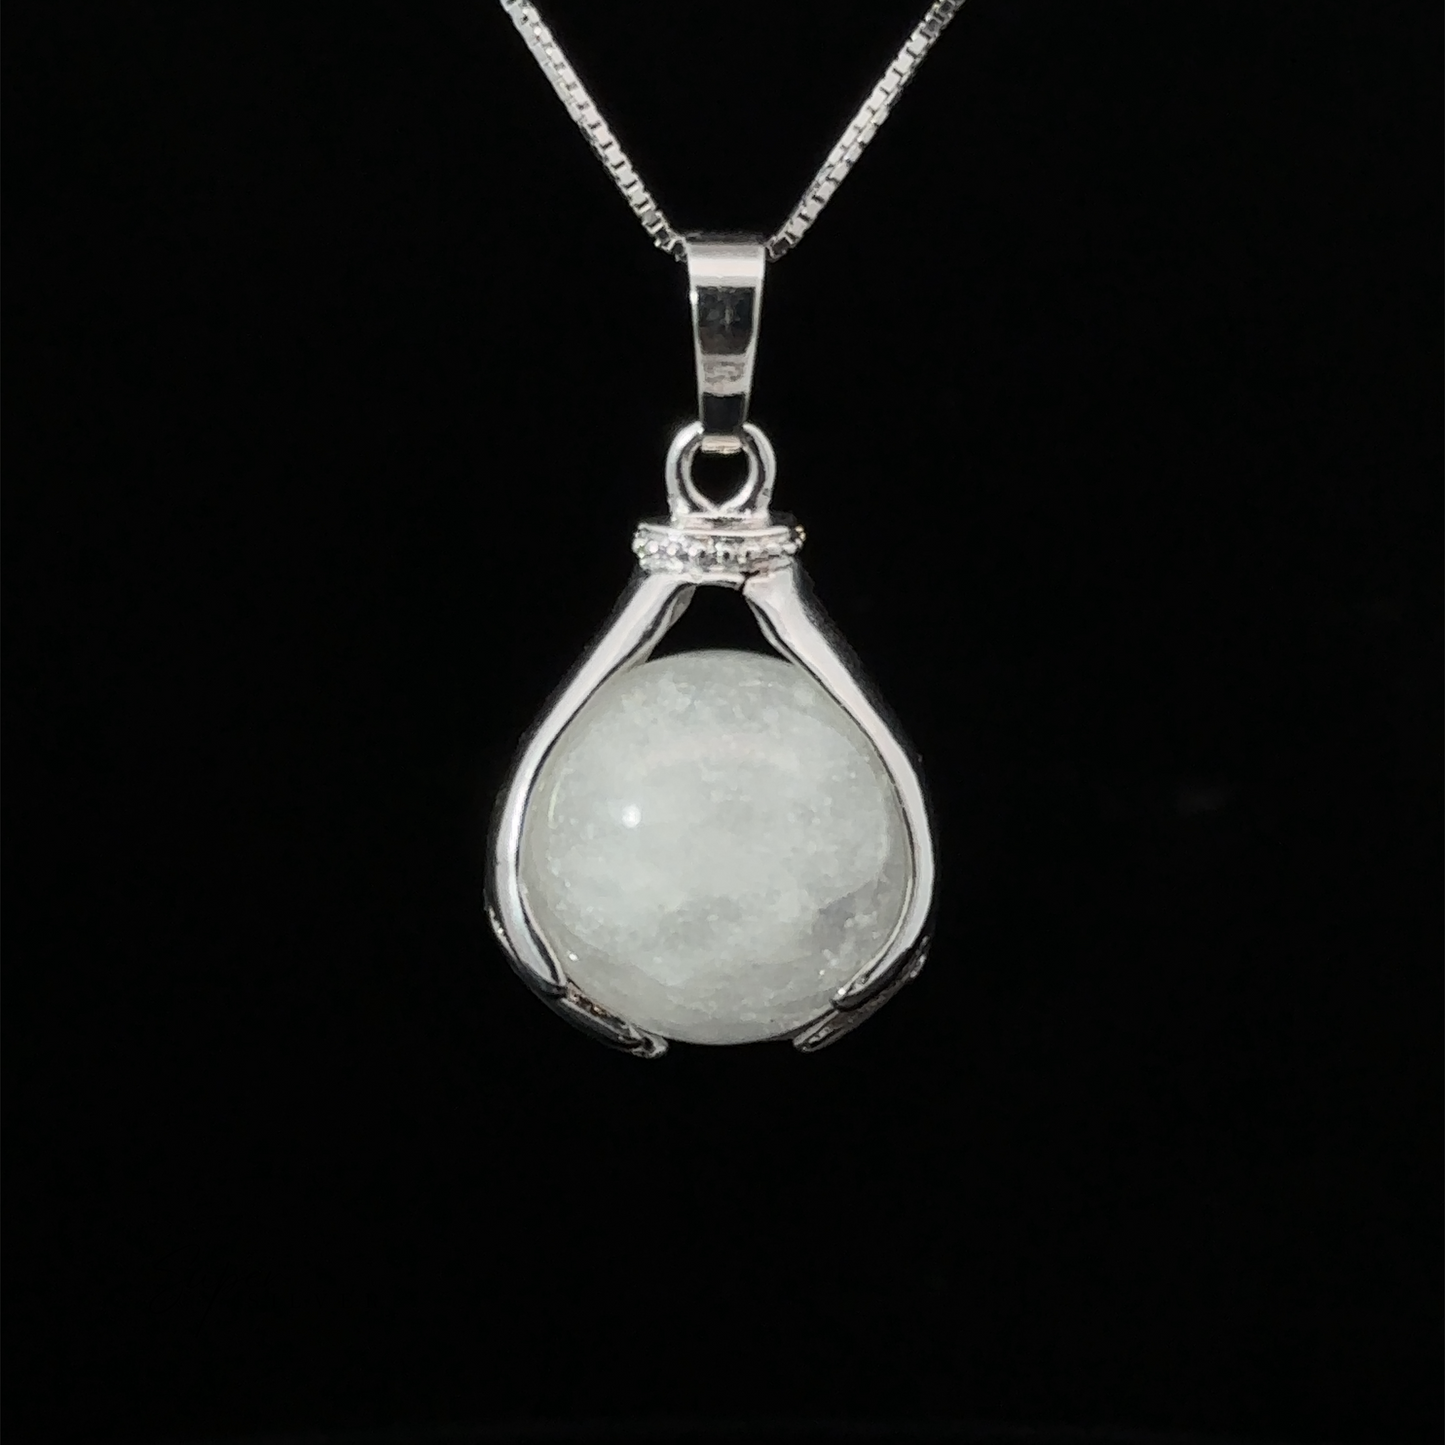 
                  
                    A Sphere Crystal Pendant features a smooth, round quartz gemstone held between two curved prongs, suspended from a thin chain against a black background.
                  
                